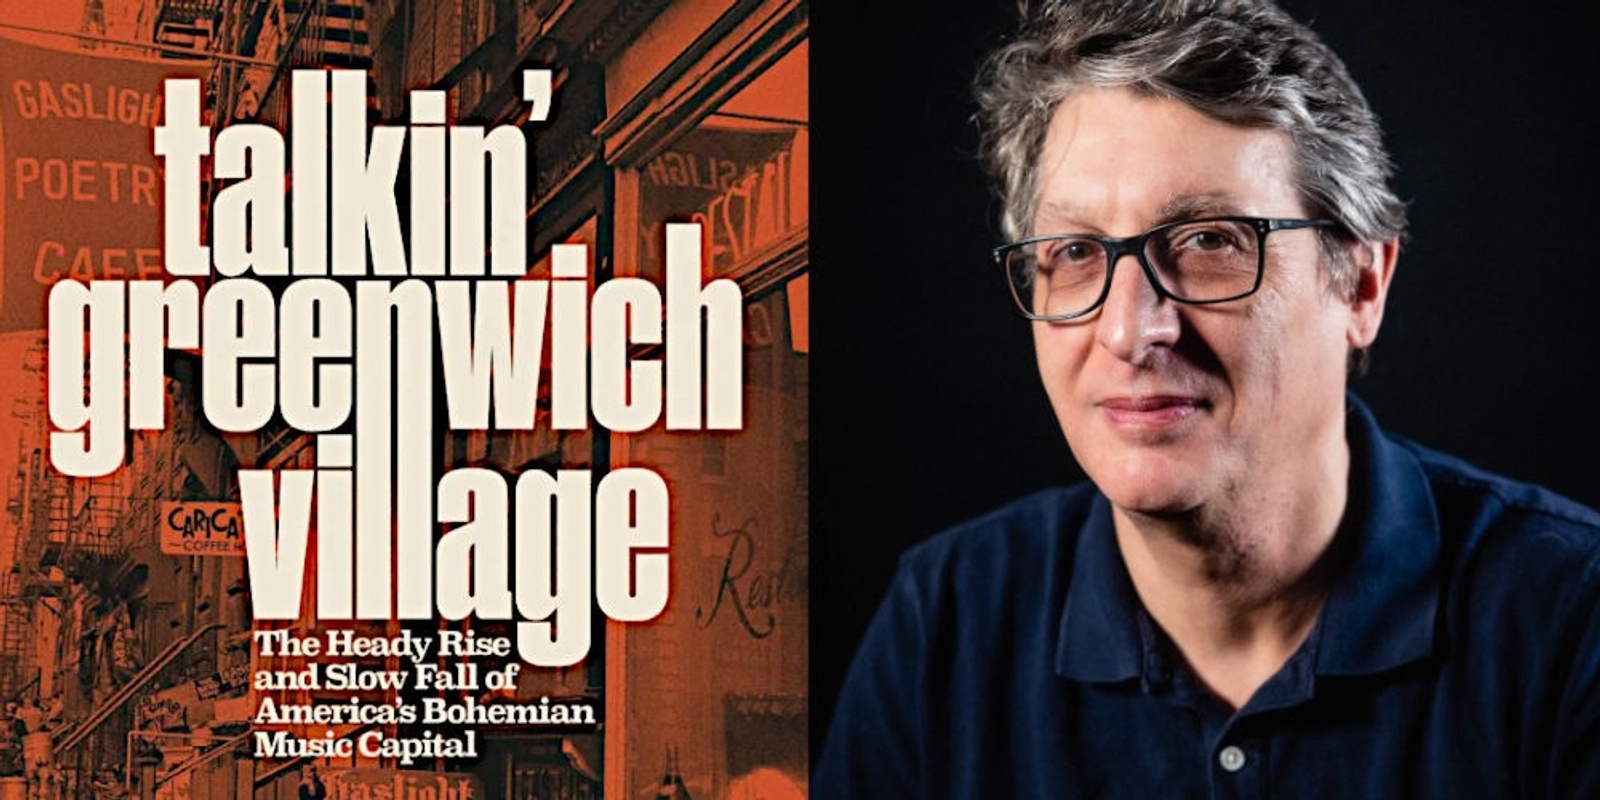 Banner image for Talkin' Greenwich Village: The Heady Rise and Slow Fall of America’s Bohemian Music Capital: David Browne in conversation with Liz Thomson